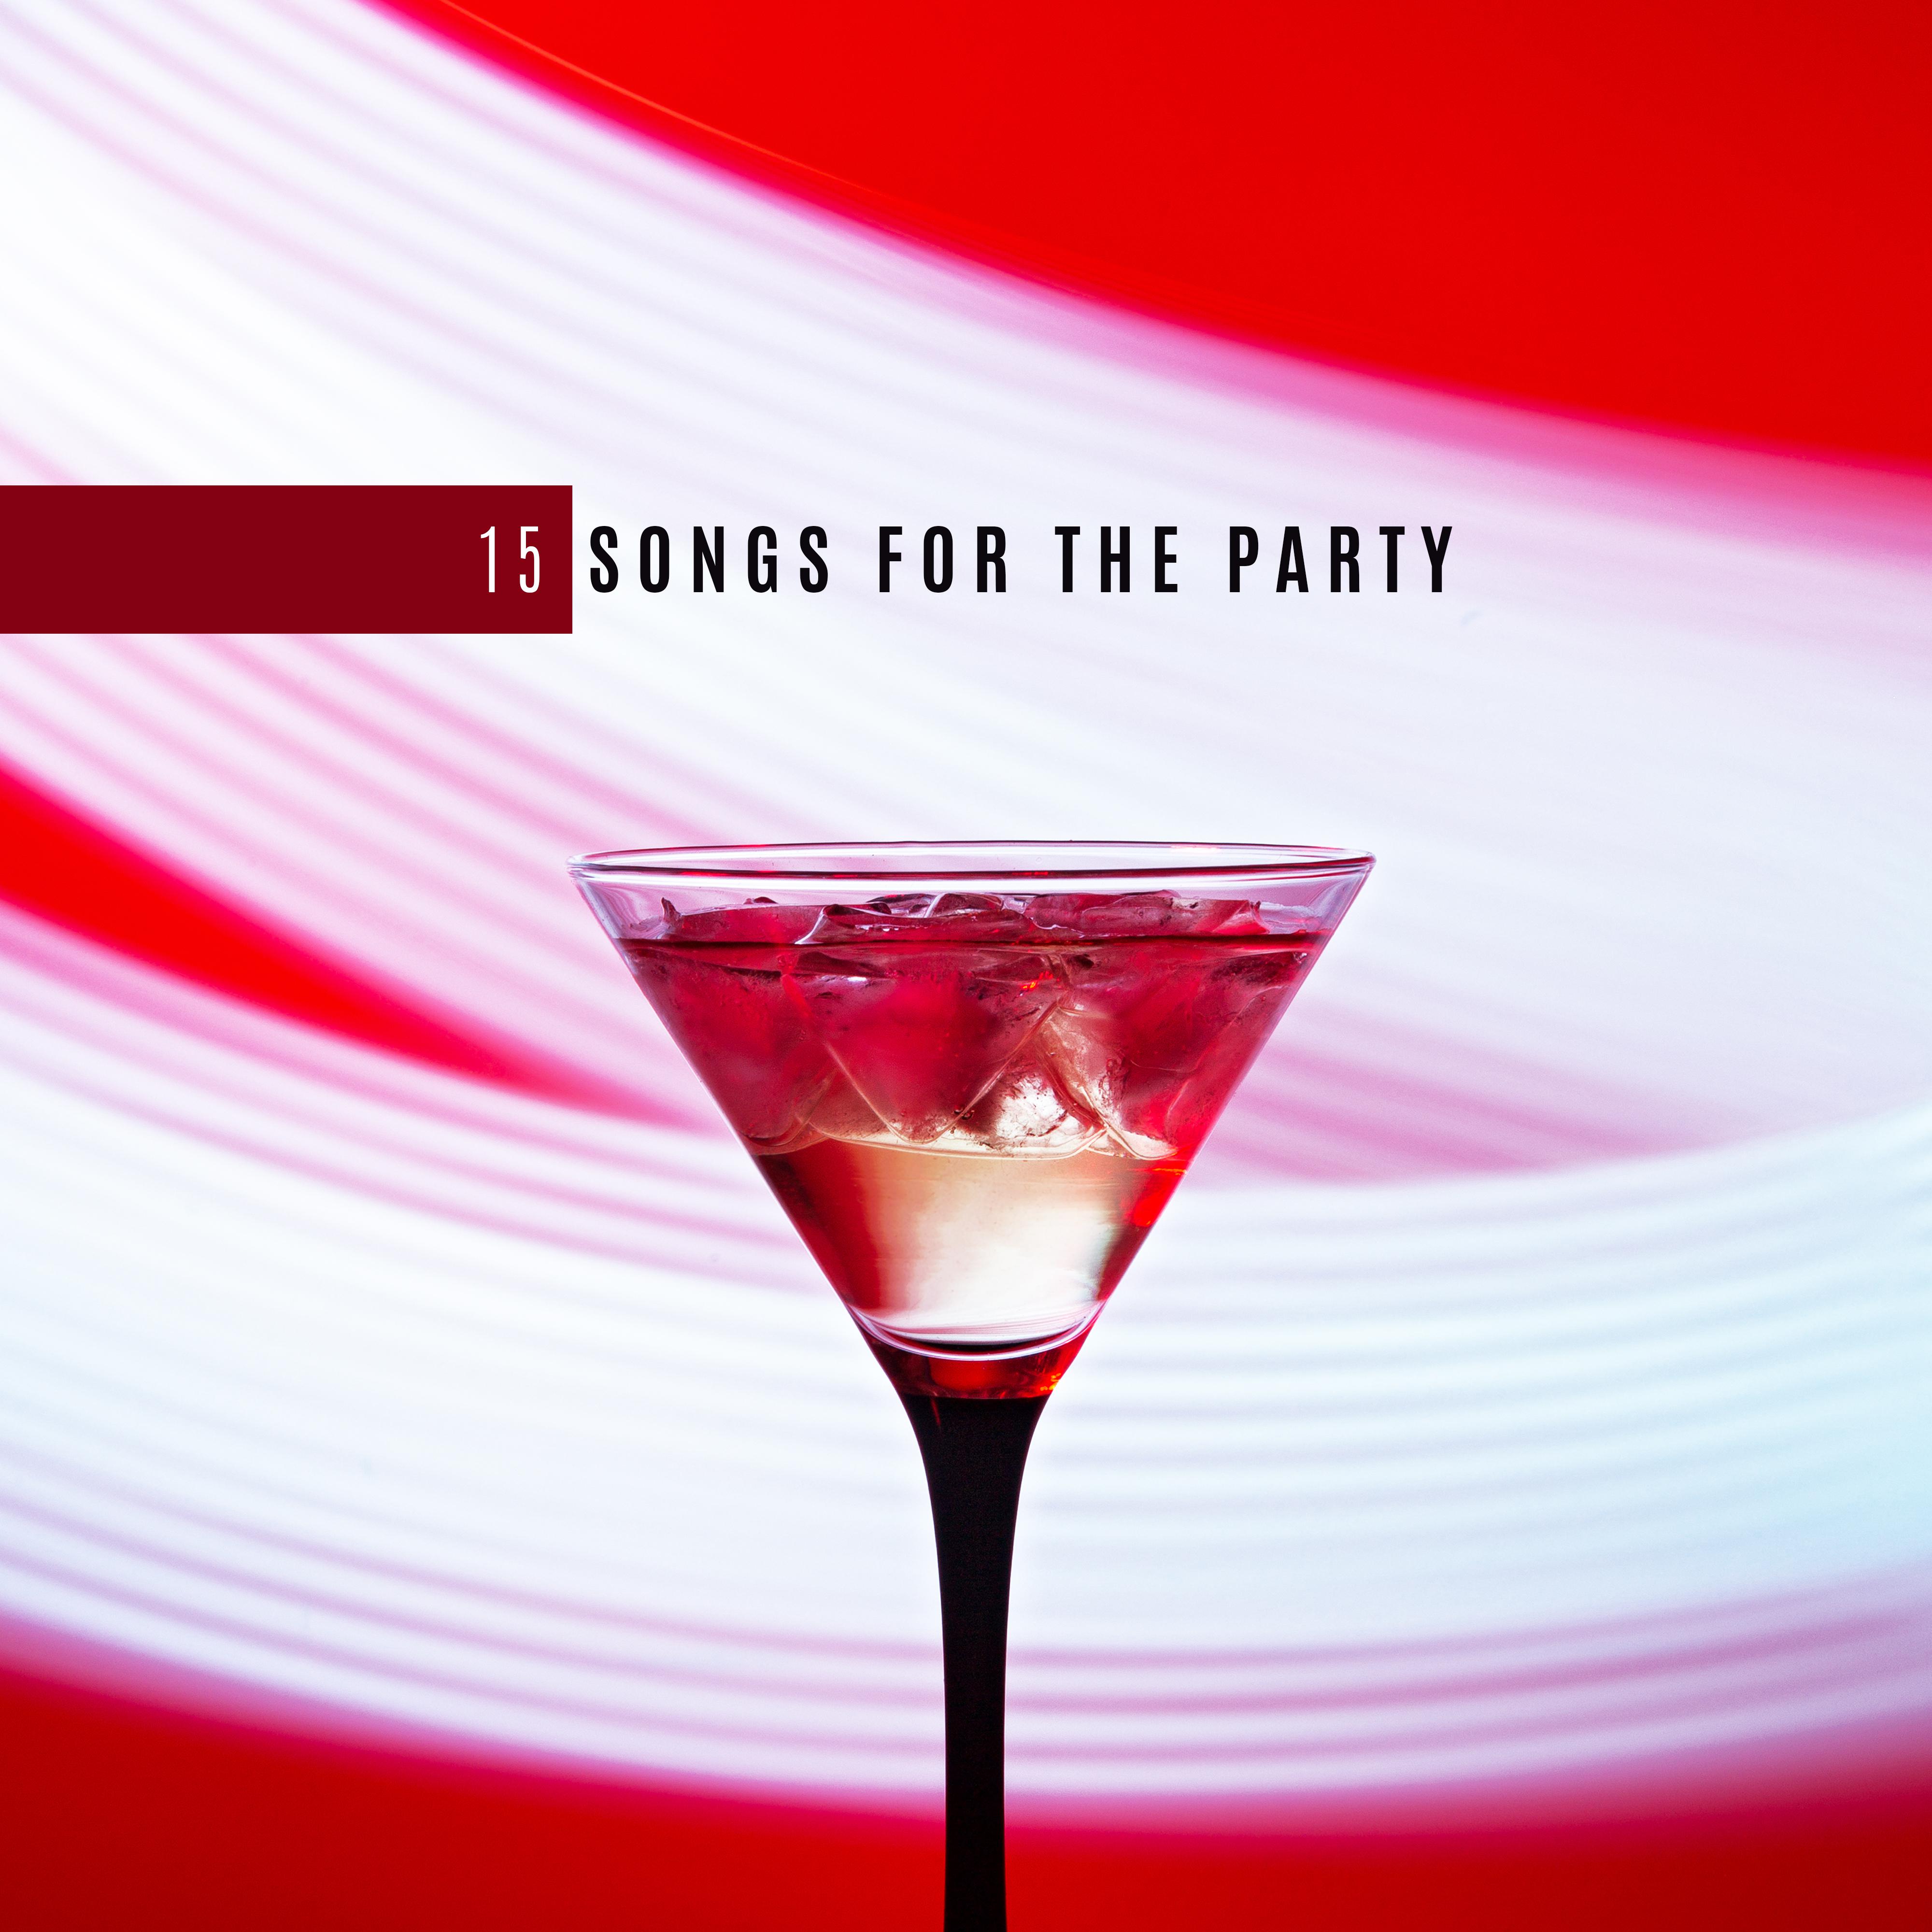 15 Songs for the Party